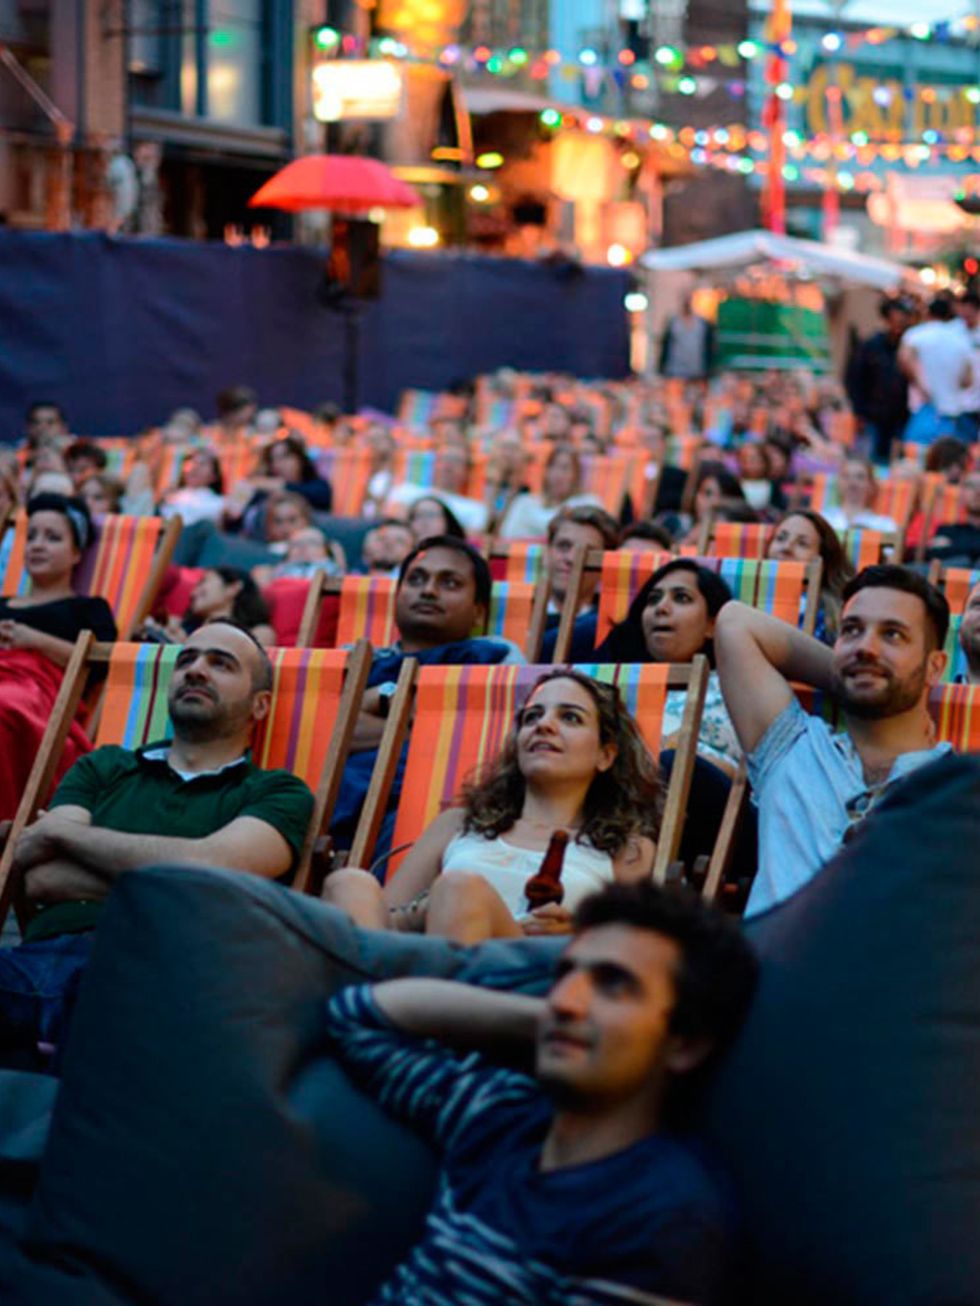 <p>FILM: Backyard Cinema Film Festival</p>

<p>Step away from the multiplex, people. Because why sit inside in the dark when you can watch classic films such as Whiplash, Grease and Clueless under the stars, amid the colourful surrounds of Camden Market? 